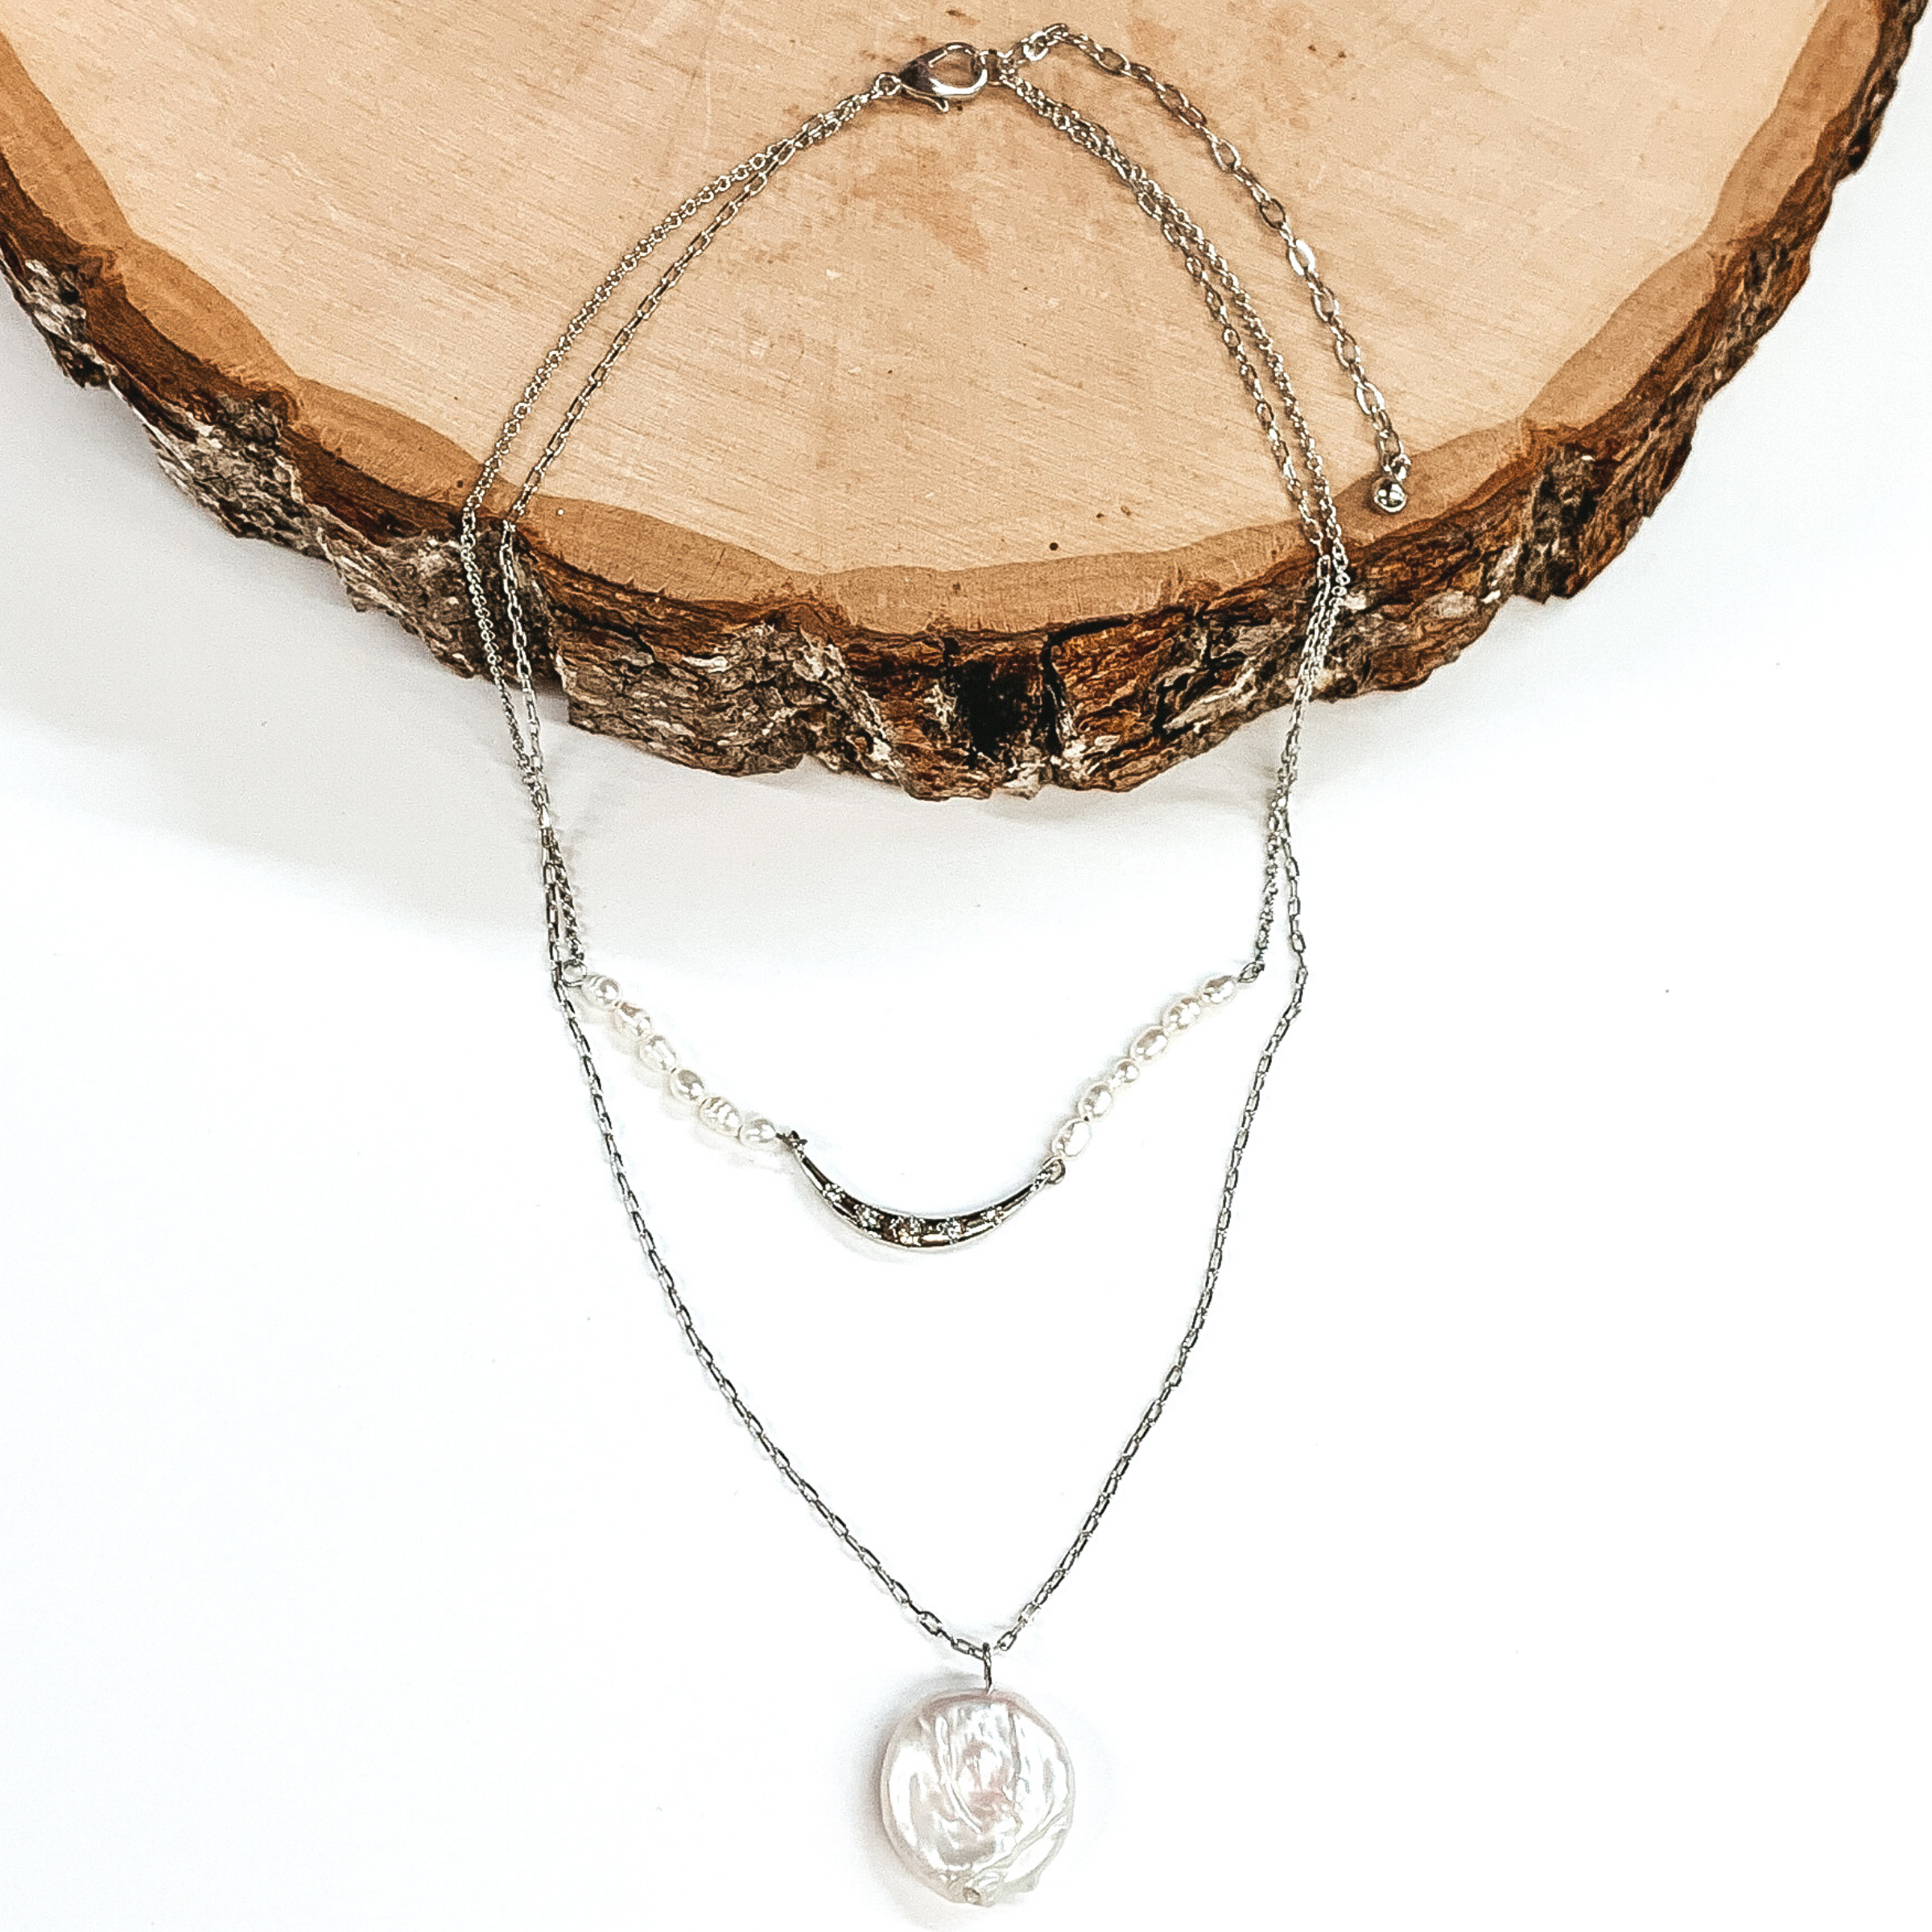 Silver douvle layered necklace. The shorter chain has a middle silver bar with white beads on either side of the bar. The longer strand has a single white pendant. This necklace is pictured laying partially on a piece of wood on a white background. 